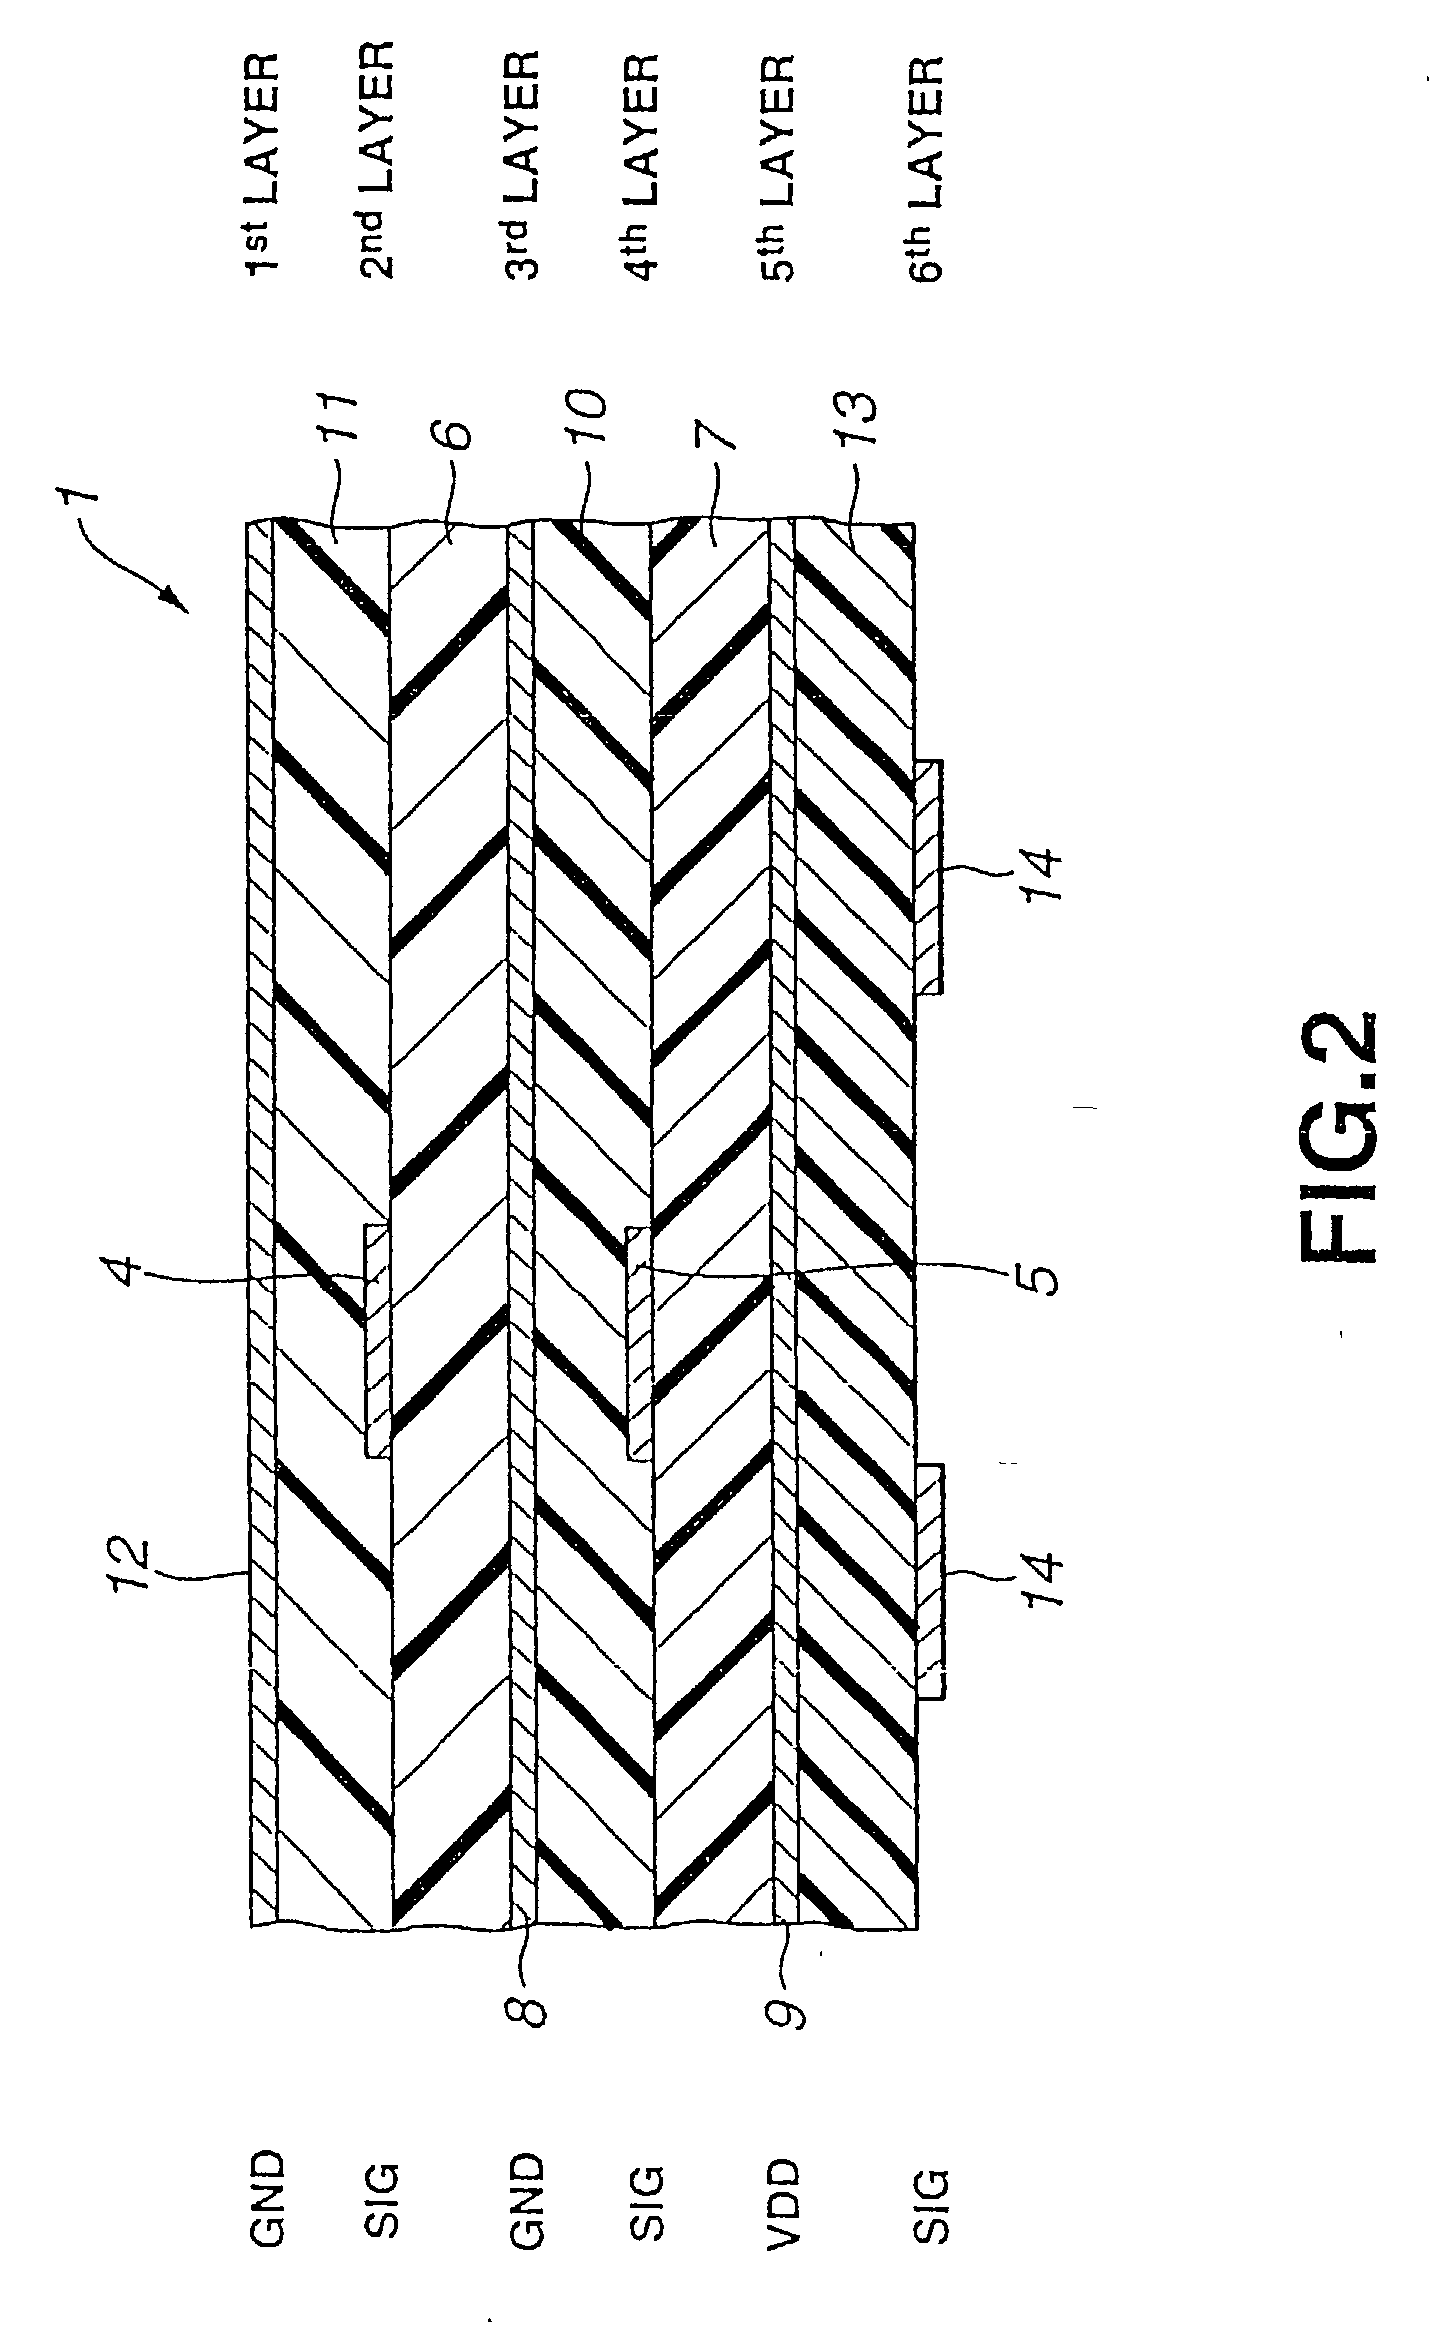 Multilayer type printed-wiring board and method of measuring impedance of multilayer type printed-wiring board